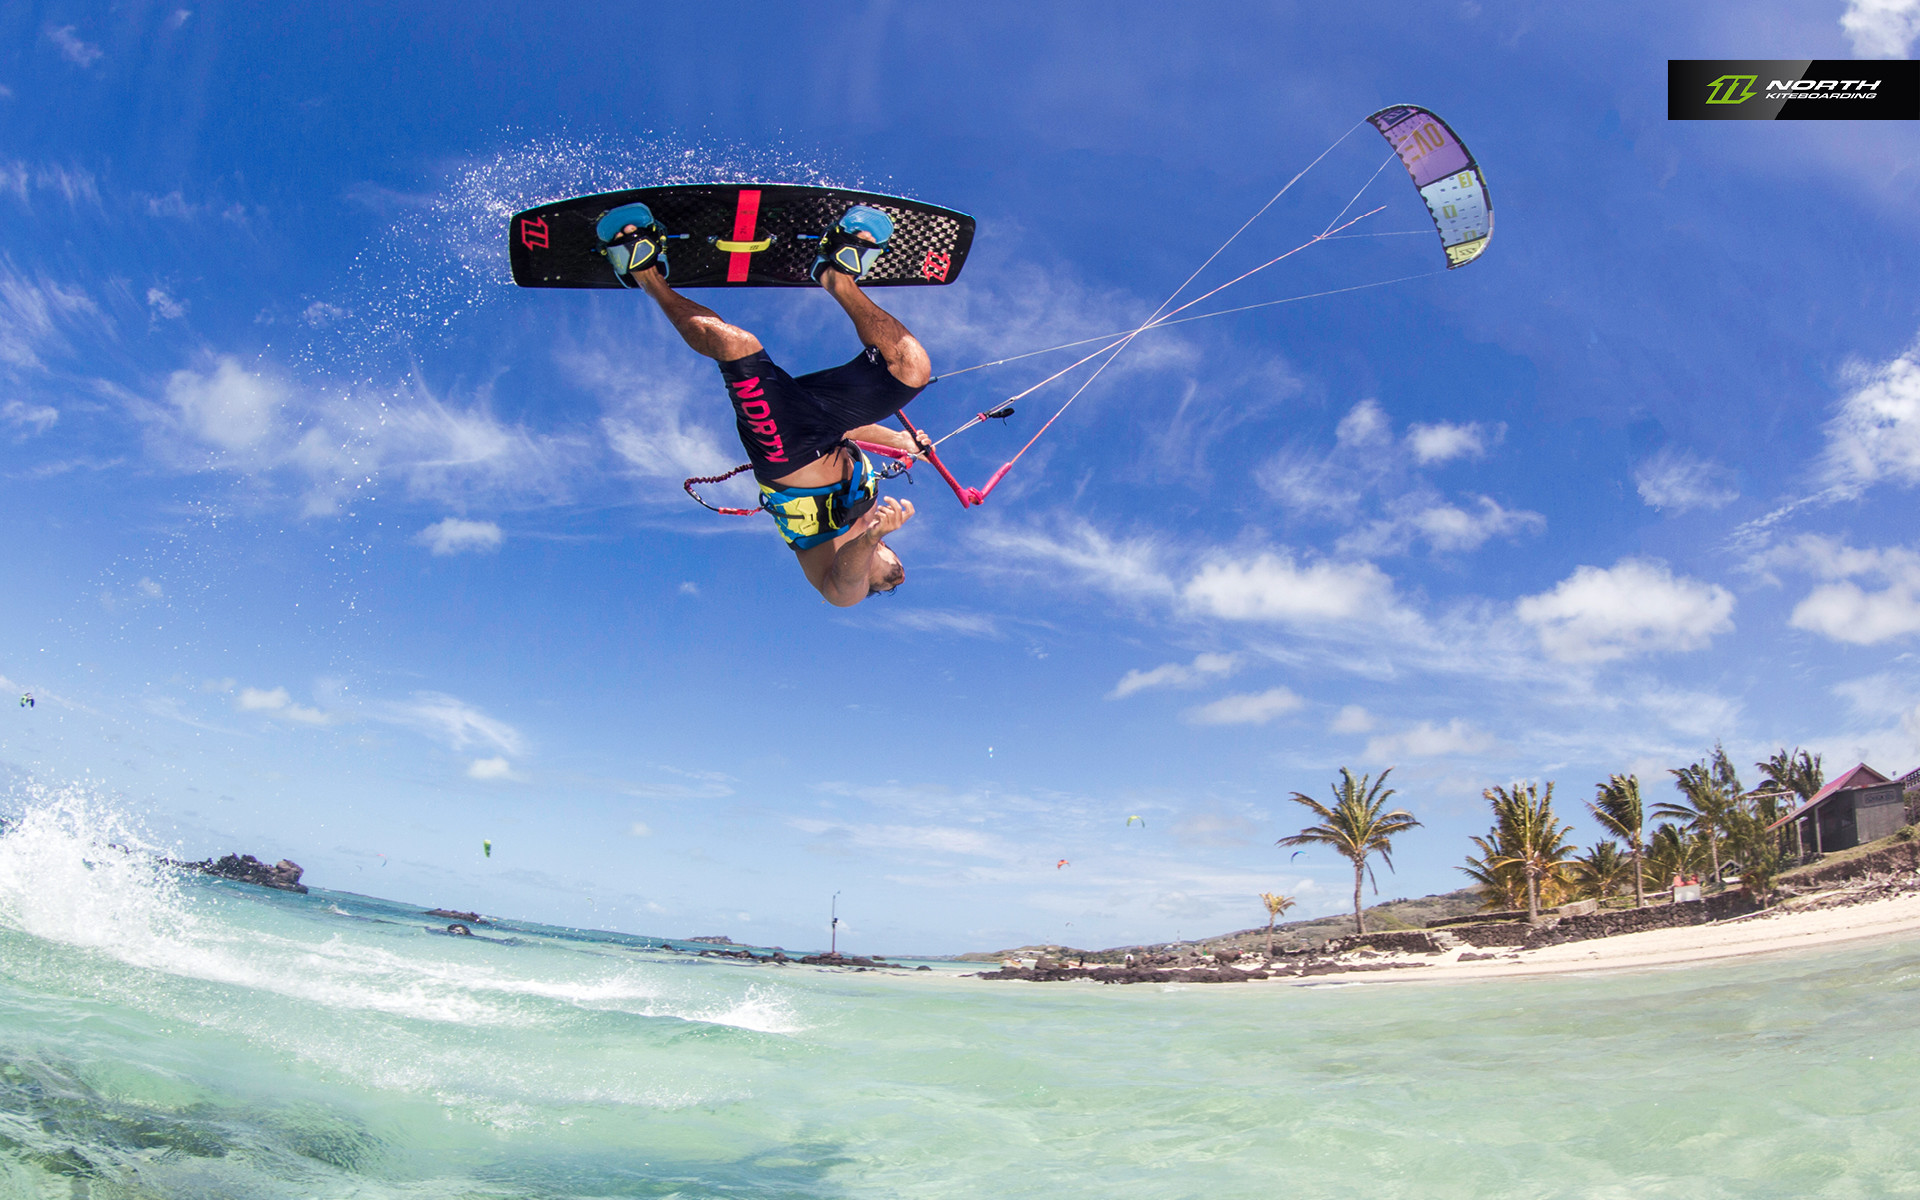 Download This Item - Kite Surfing Backgrounds - HD Wallpaper 